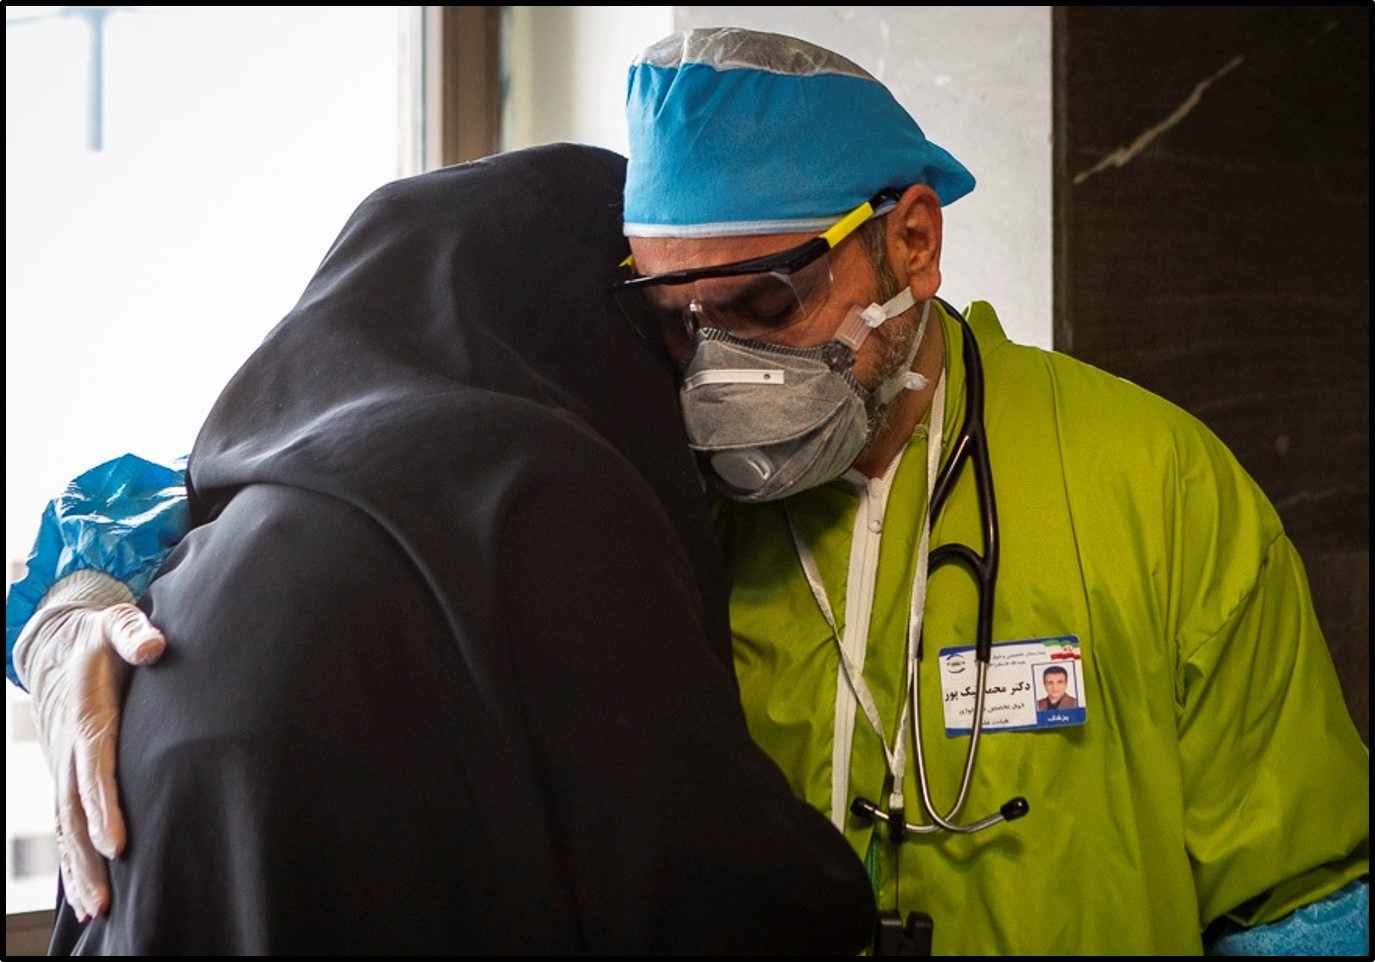 A doctor comforts a woman at a hospital in Tehran